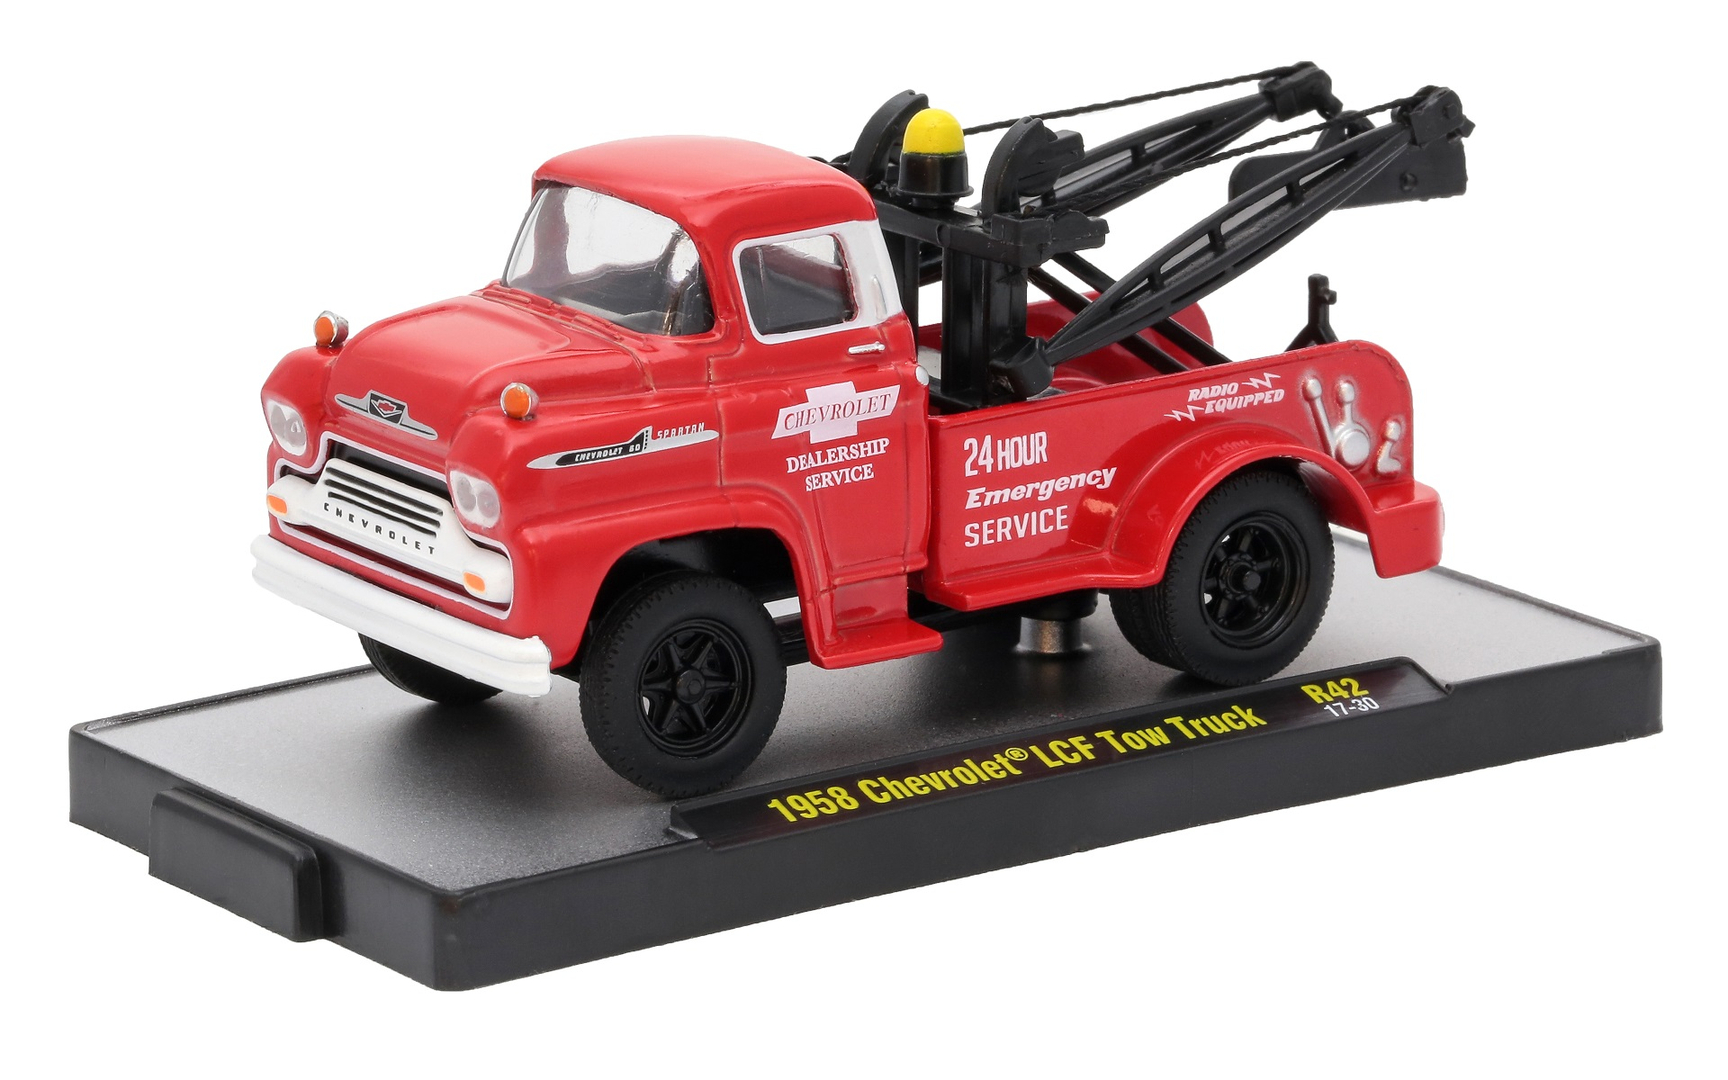 1 of 6888 M2 Machines by M2 Collectible Auto-Trucks 1958 Chevy Apache Tow Truck 1:64 Scale R52 18-62 Orange/White Top Details Like NO Other